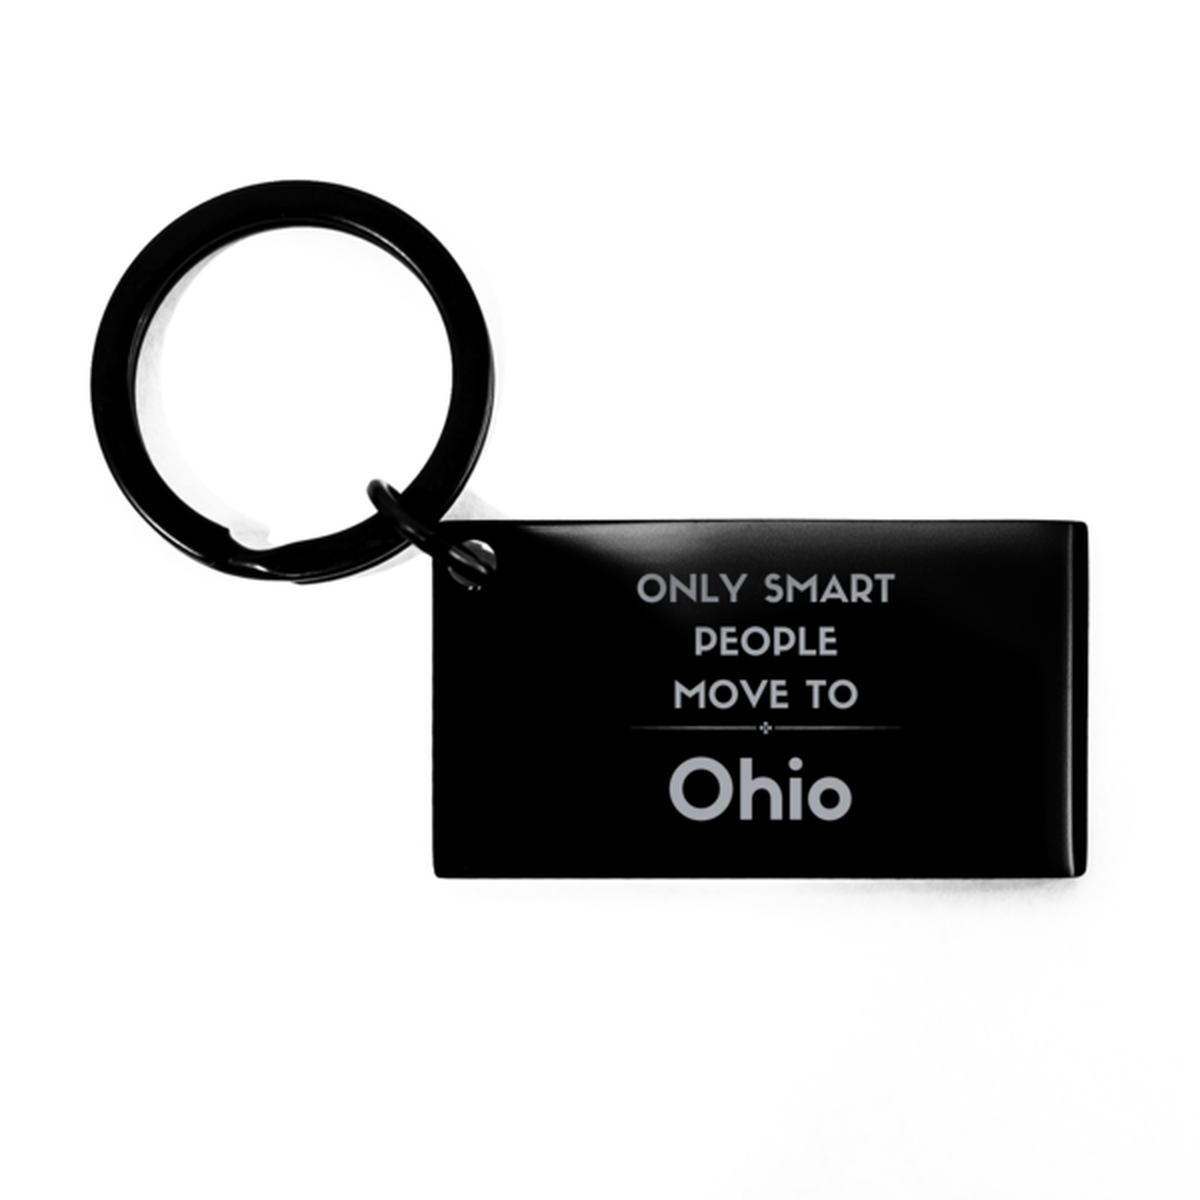 Only smart people move to Ohio Keychain, Gag Gifts For Ohio, Move to Ohio Gifts for Friends Coworker Funny Saying Quote